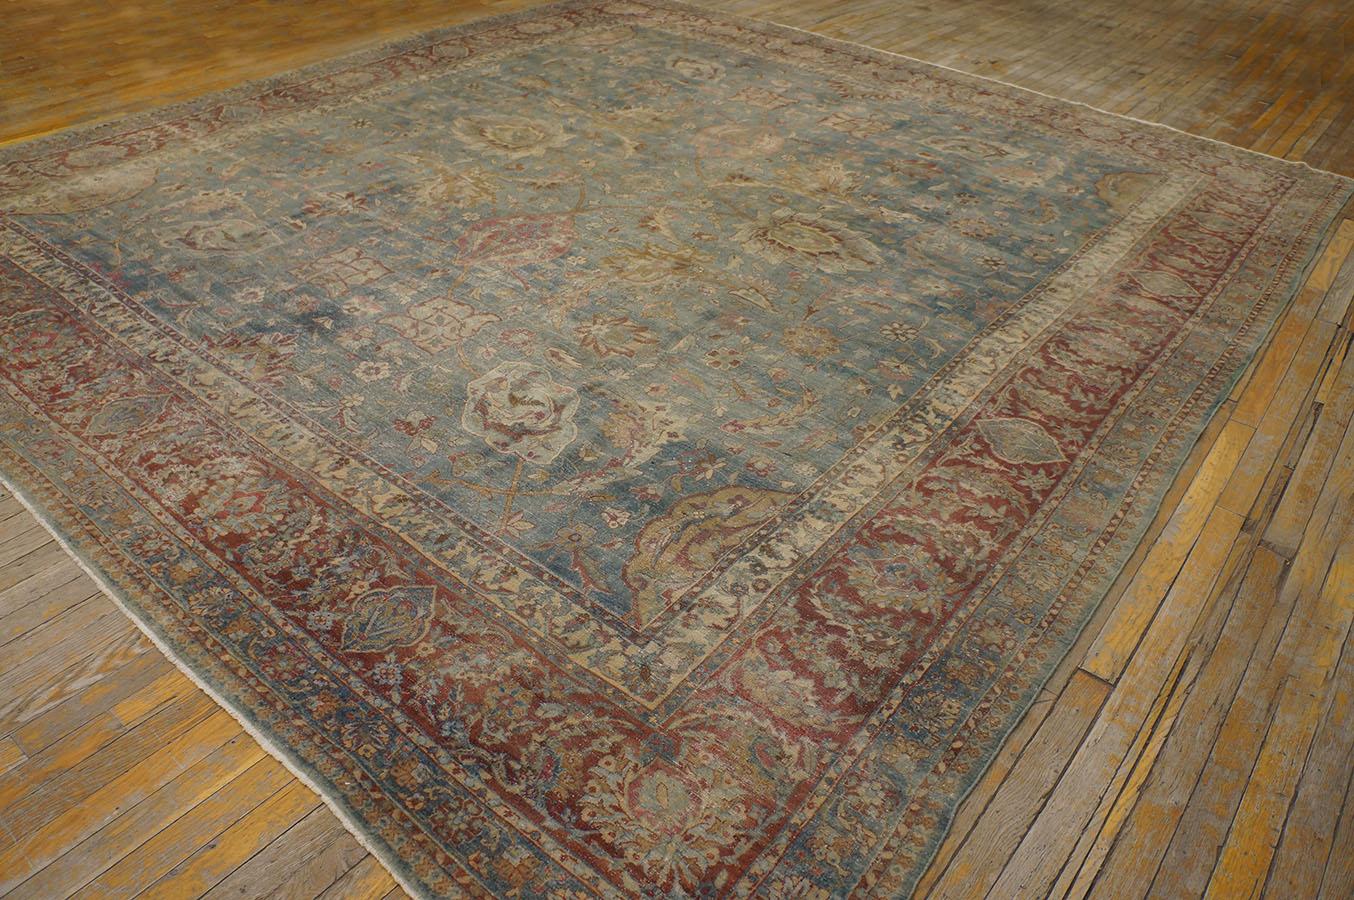 Hand-Knotted Early 20th Century Persian Kerman Carpet ( 10' 10